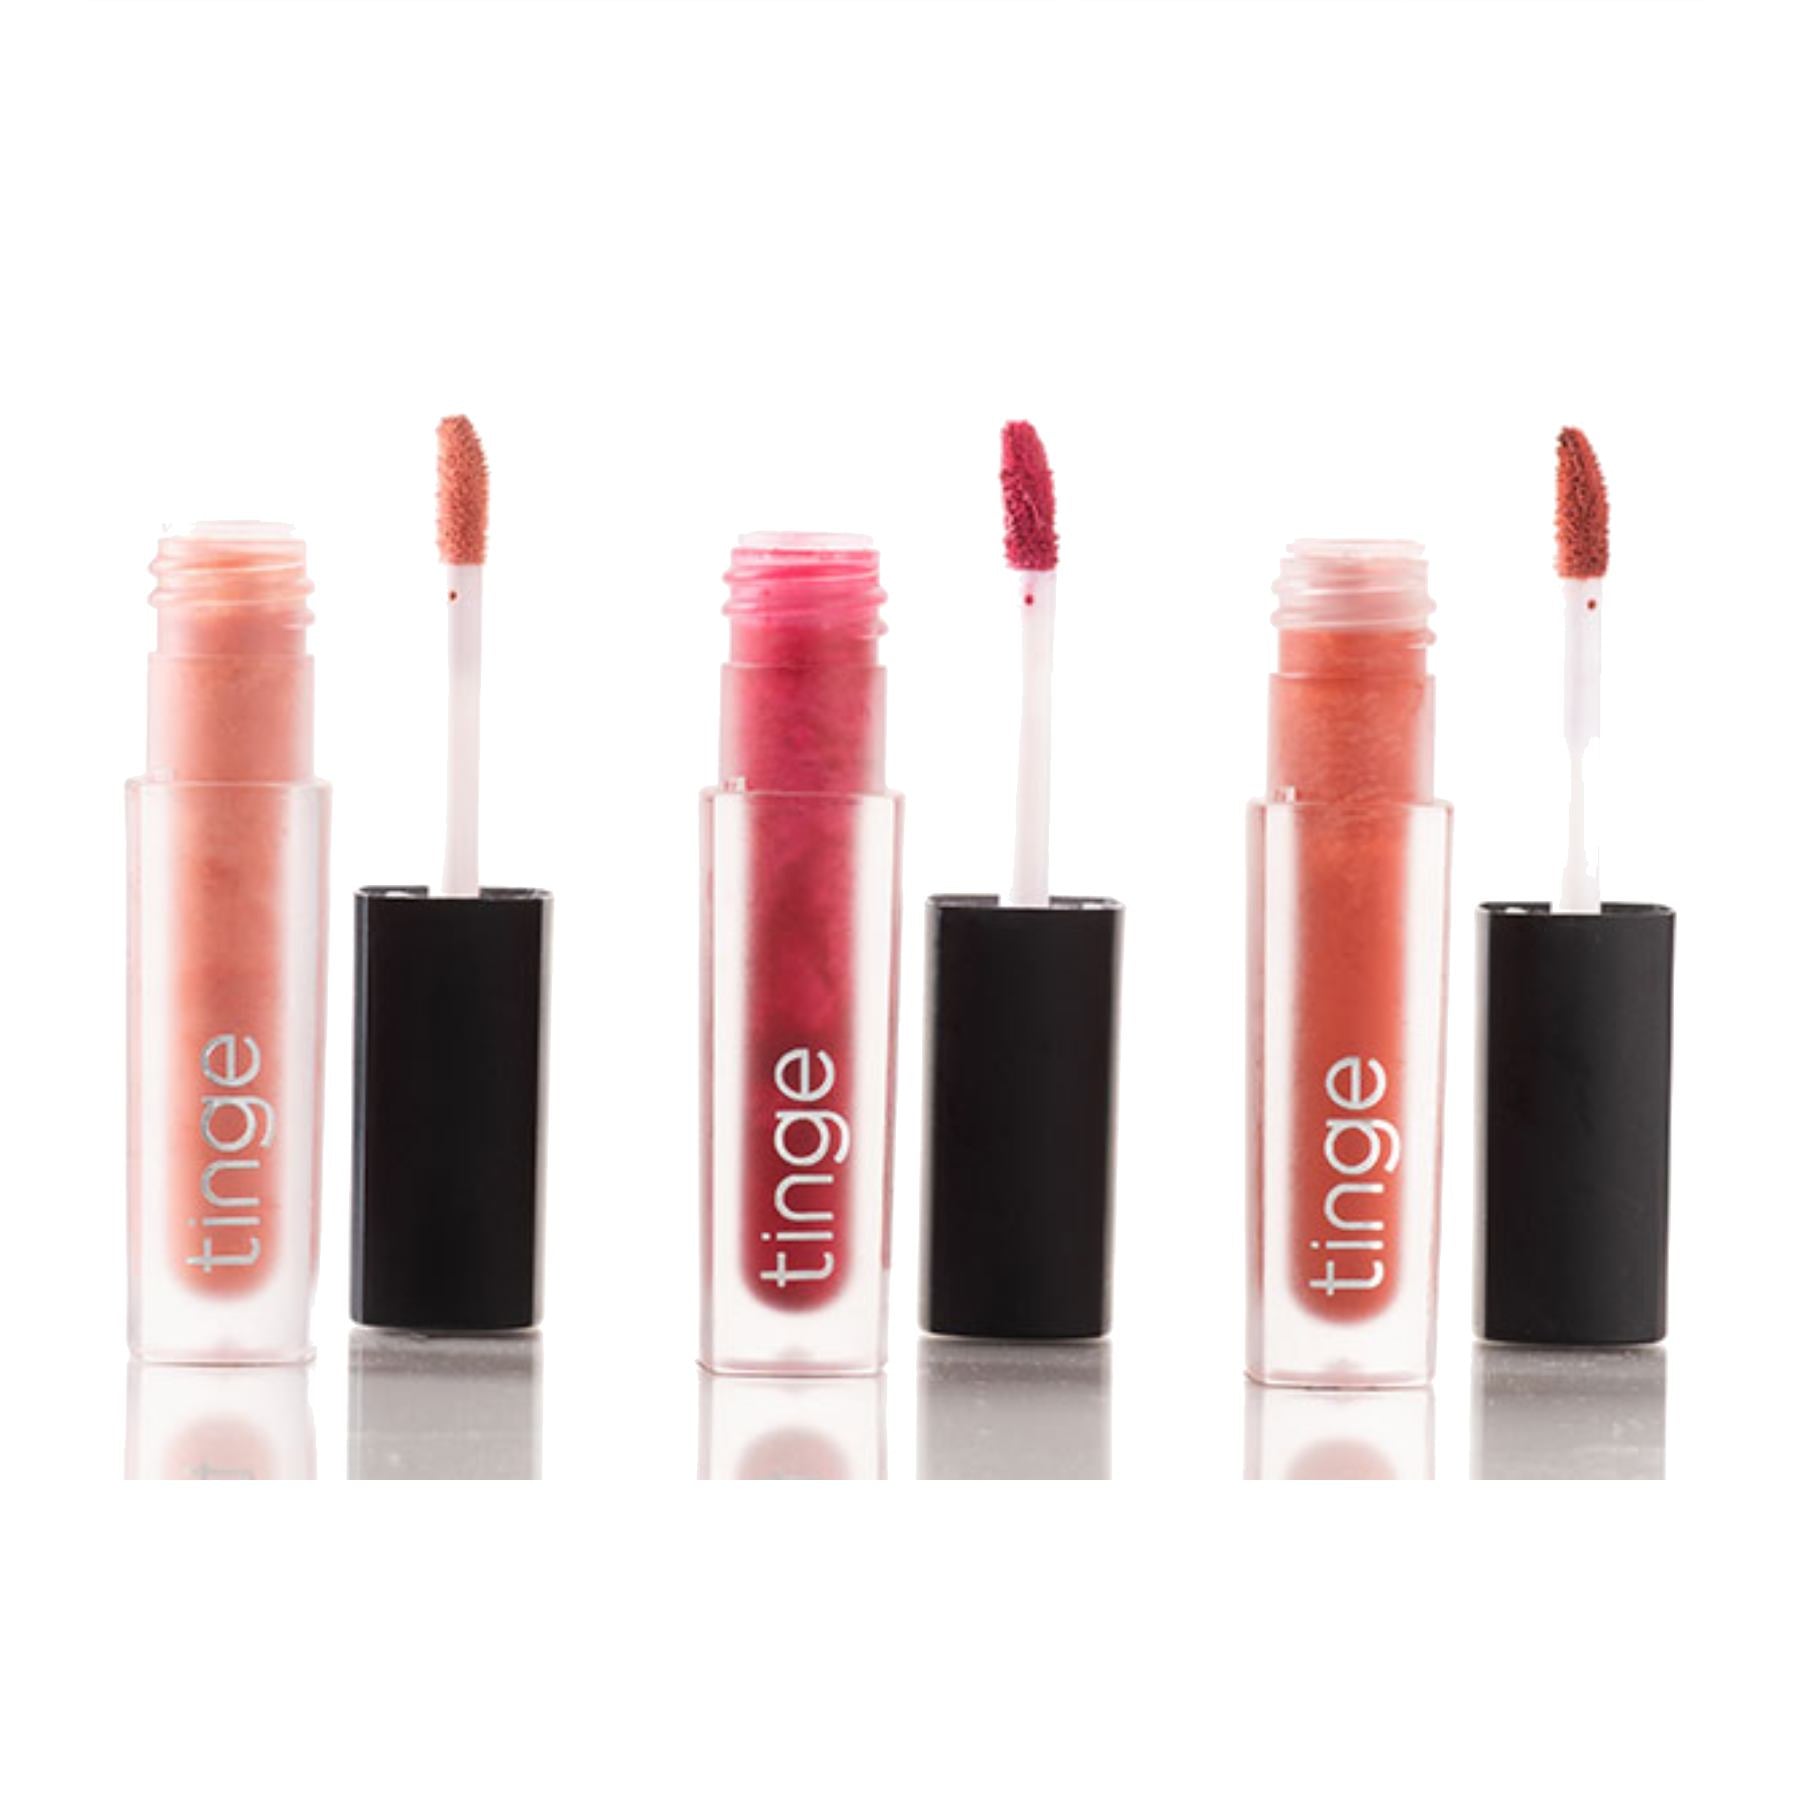 Shop Louder Liquid Lipstick- Set of 3 from Tinge on SublimeLife.in. Best for a very matte look.